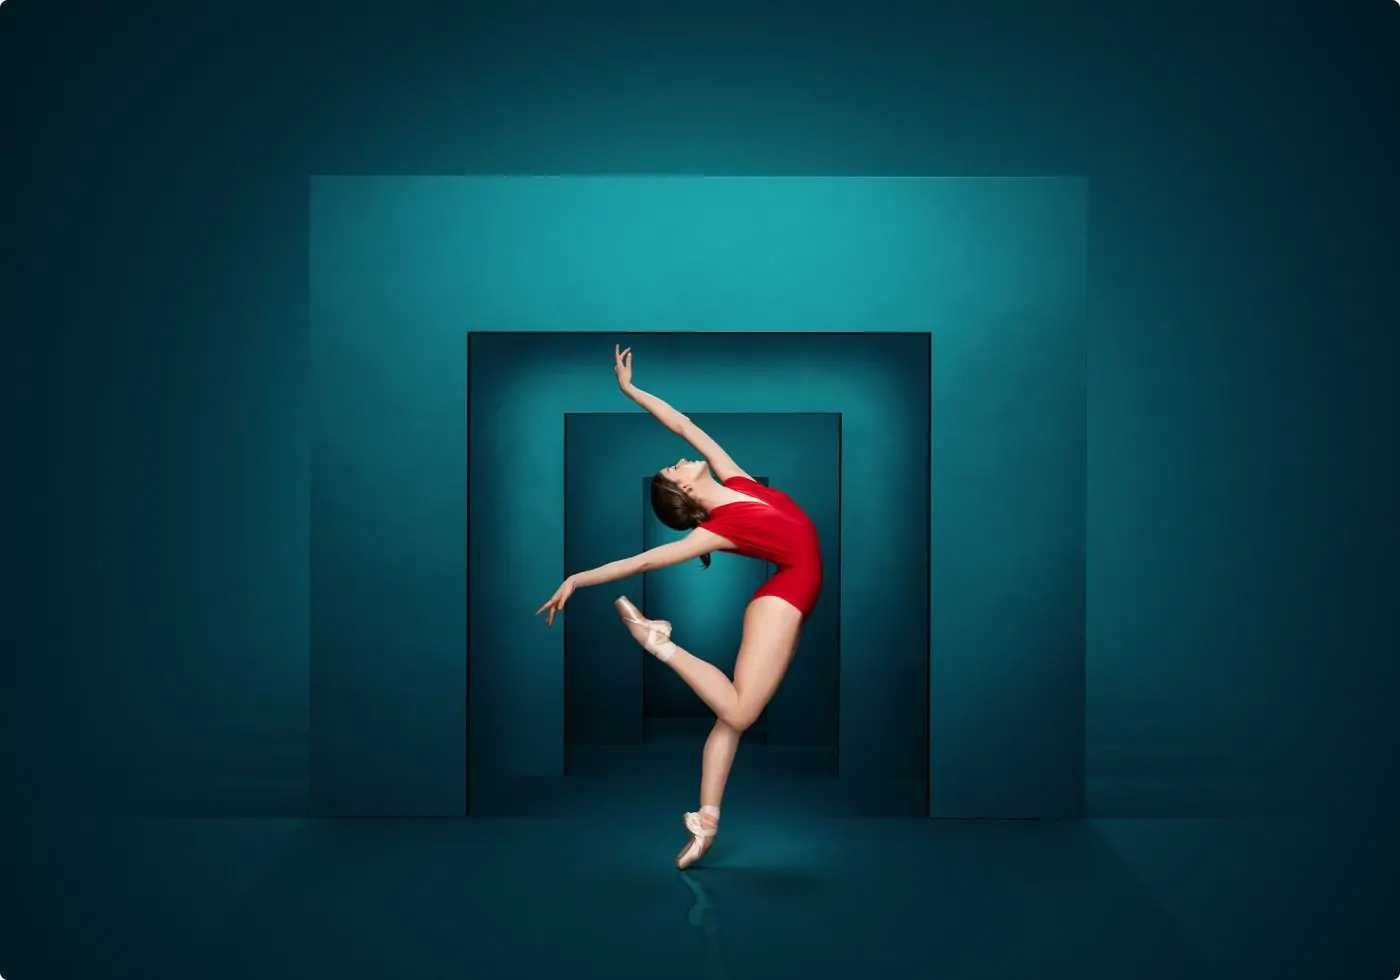 Ballet dancer posing in an arch position against a geometric background.